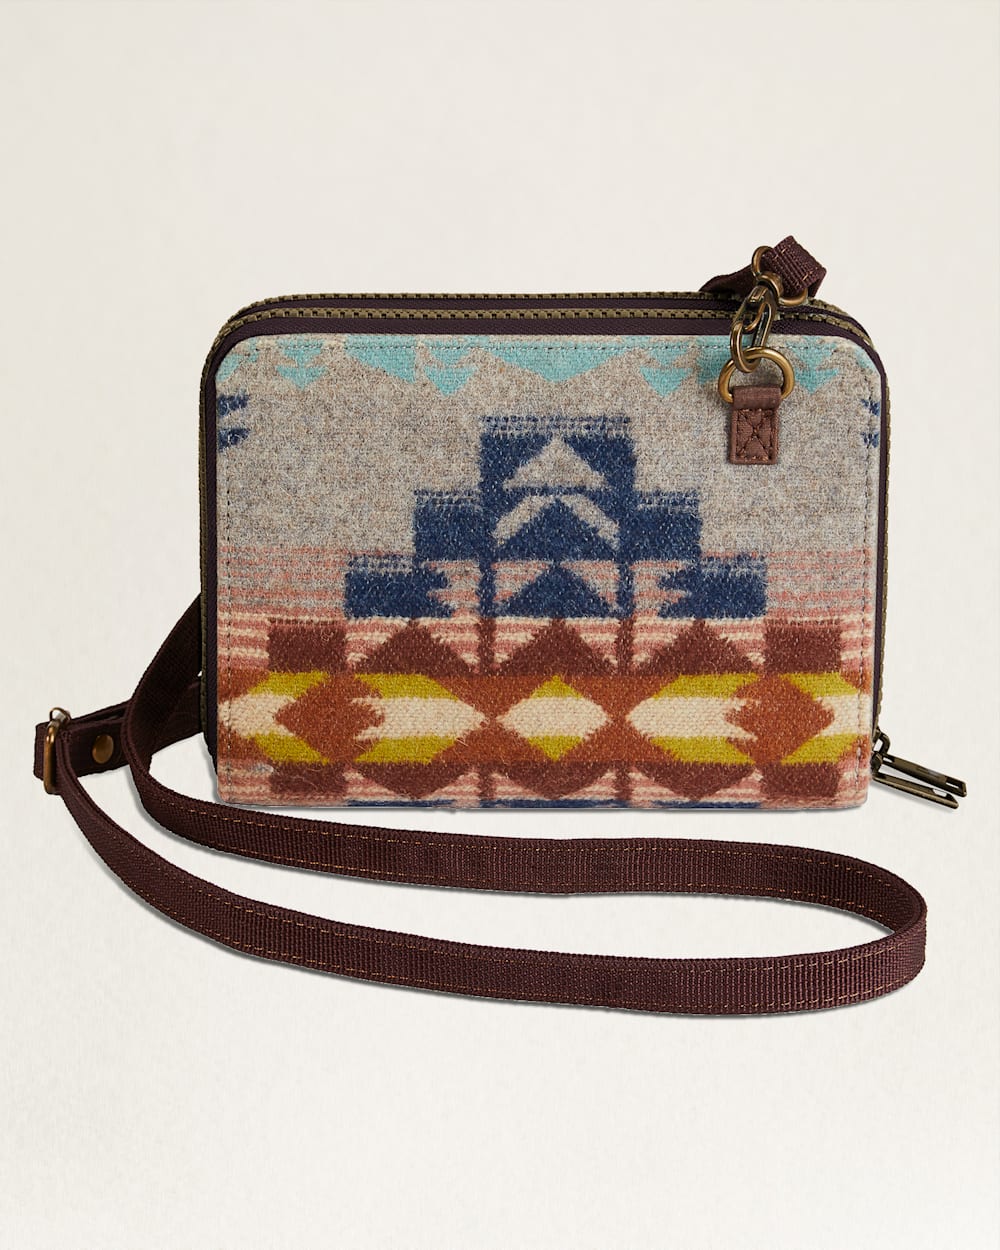 ALTERNATE VIEW OF DESERT DAWN WOOL/LEATHER CROSSBODY ORGANIZER IN TAN MIX image number 2